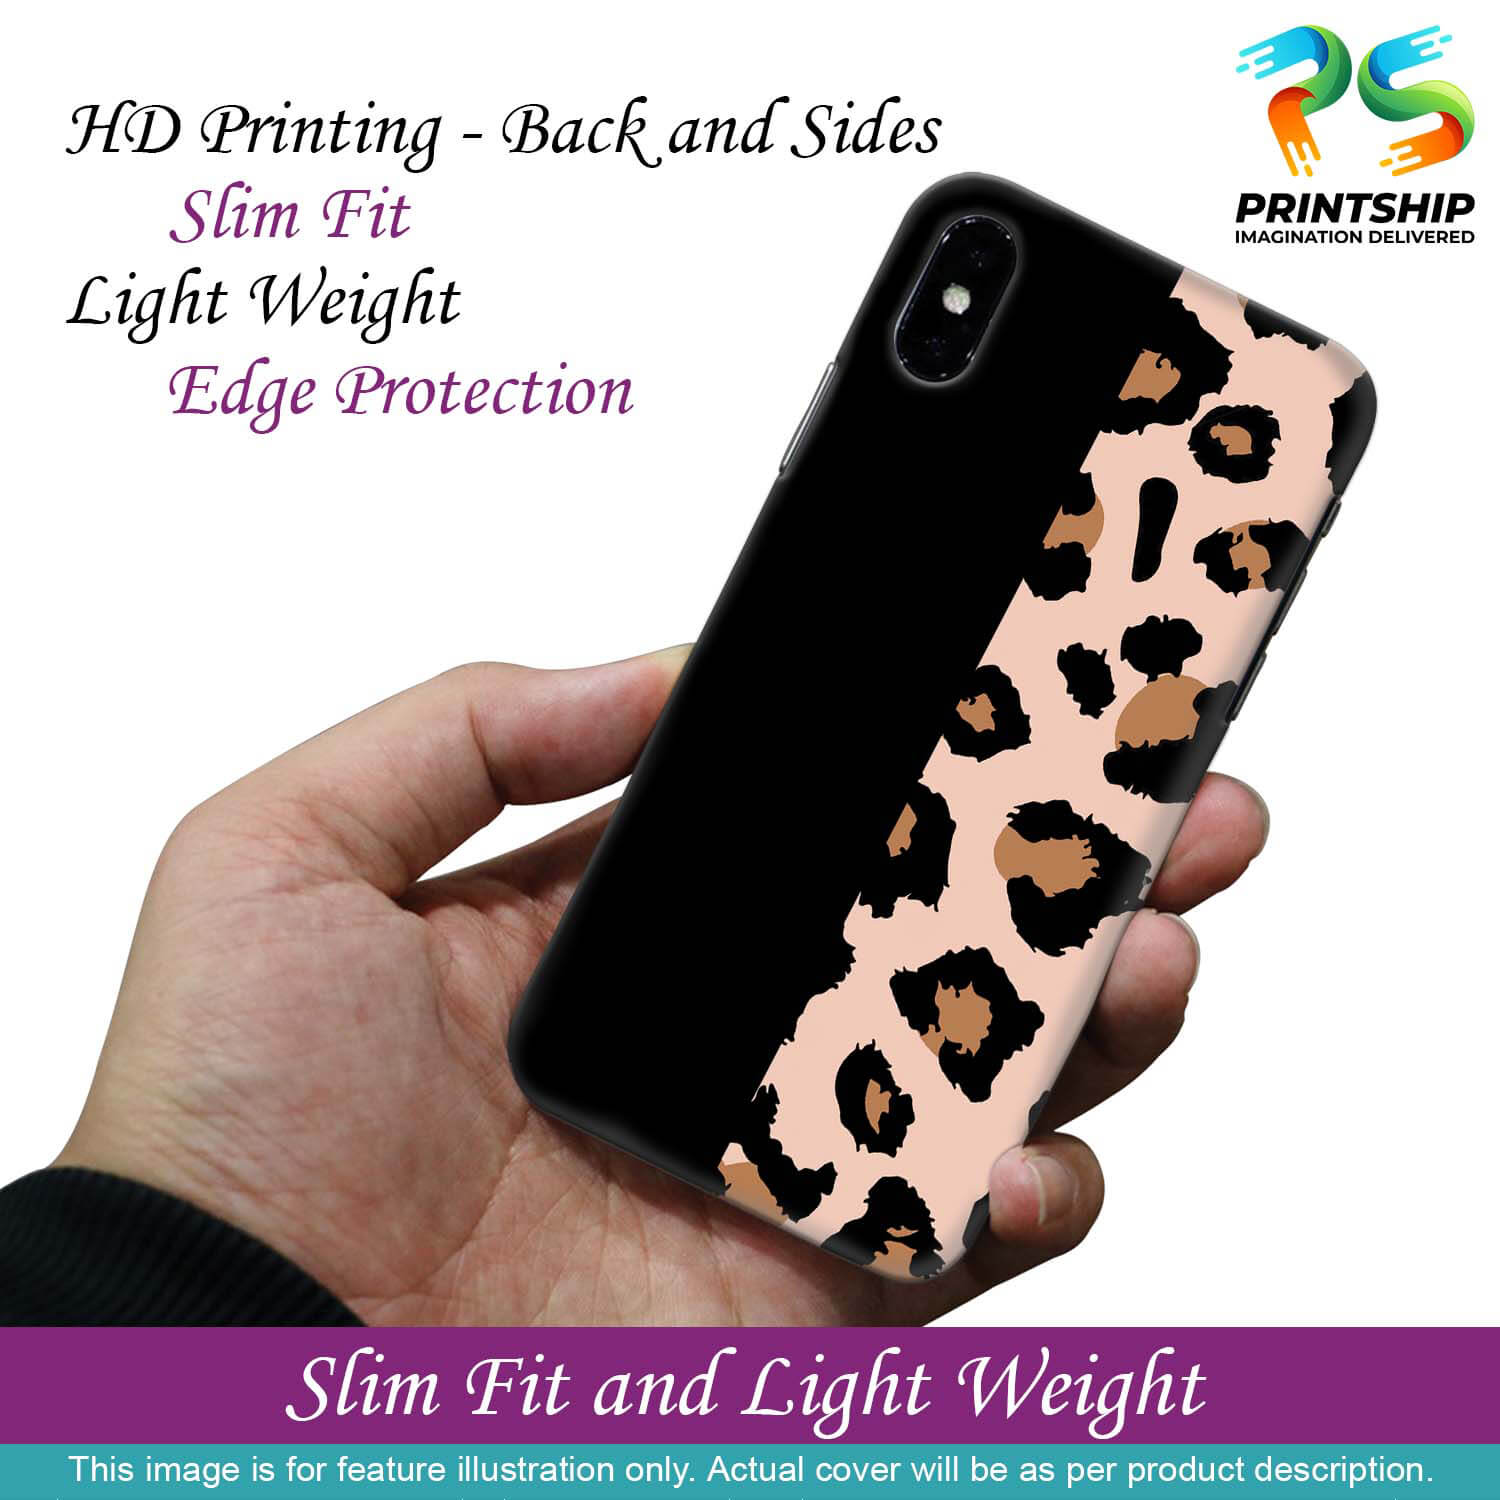 PS1339-Animal Patterns Back Cover for Xiaomi Redmi K20 and K20 Pro